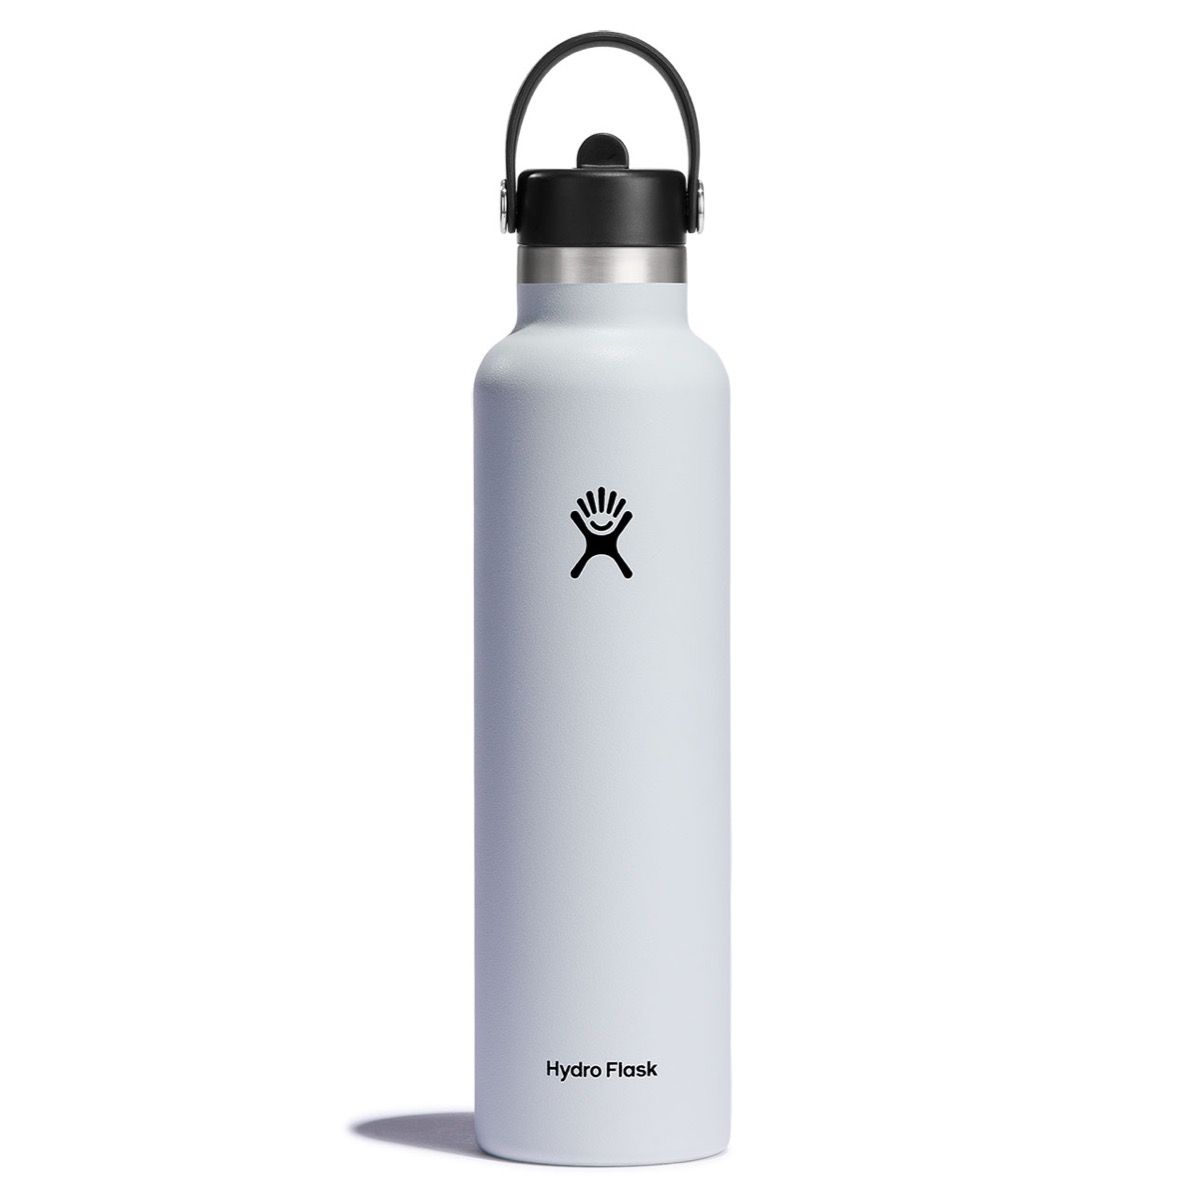 Hydro Flask 24 oz Standard Mouth with Flex Straw Cap Accessories Hydro Flask White  